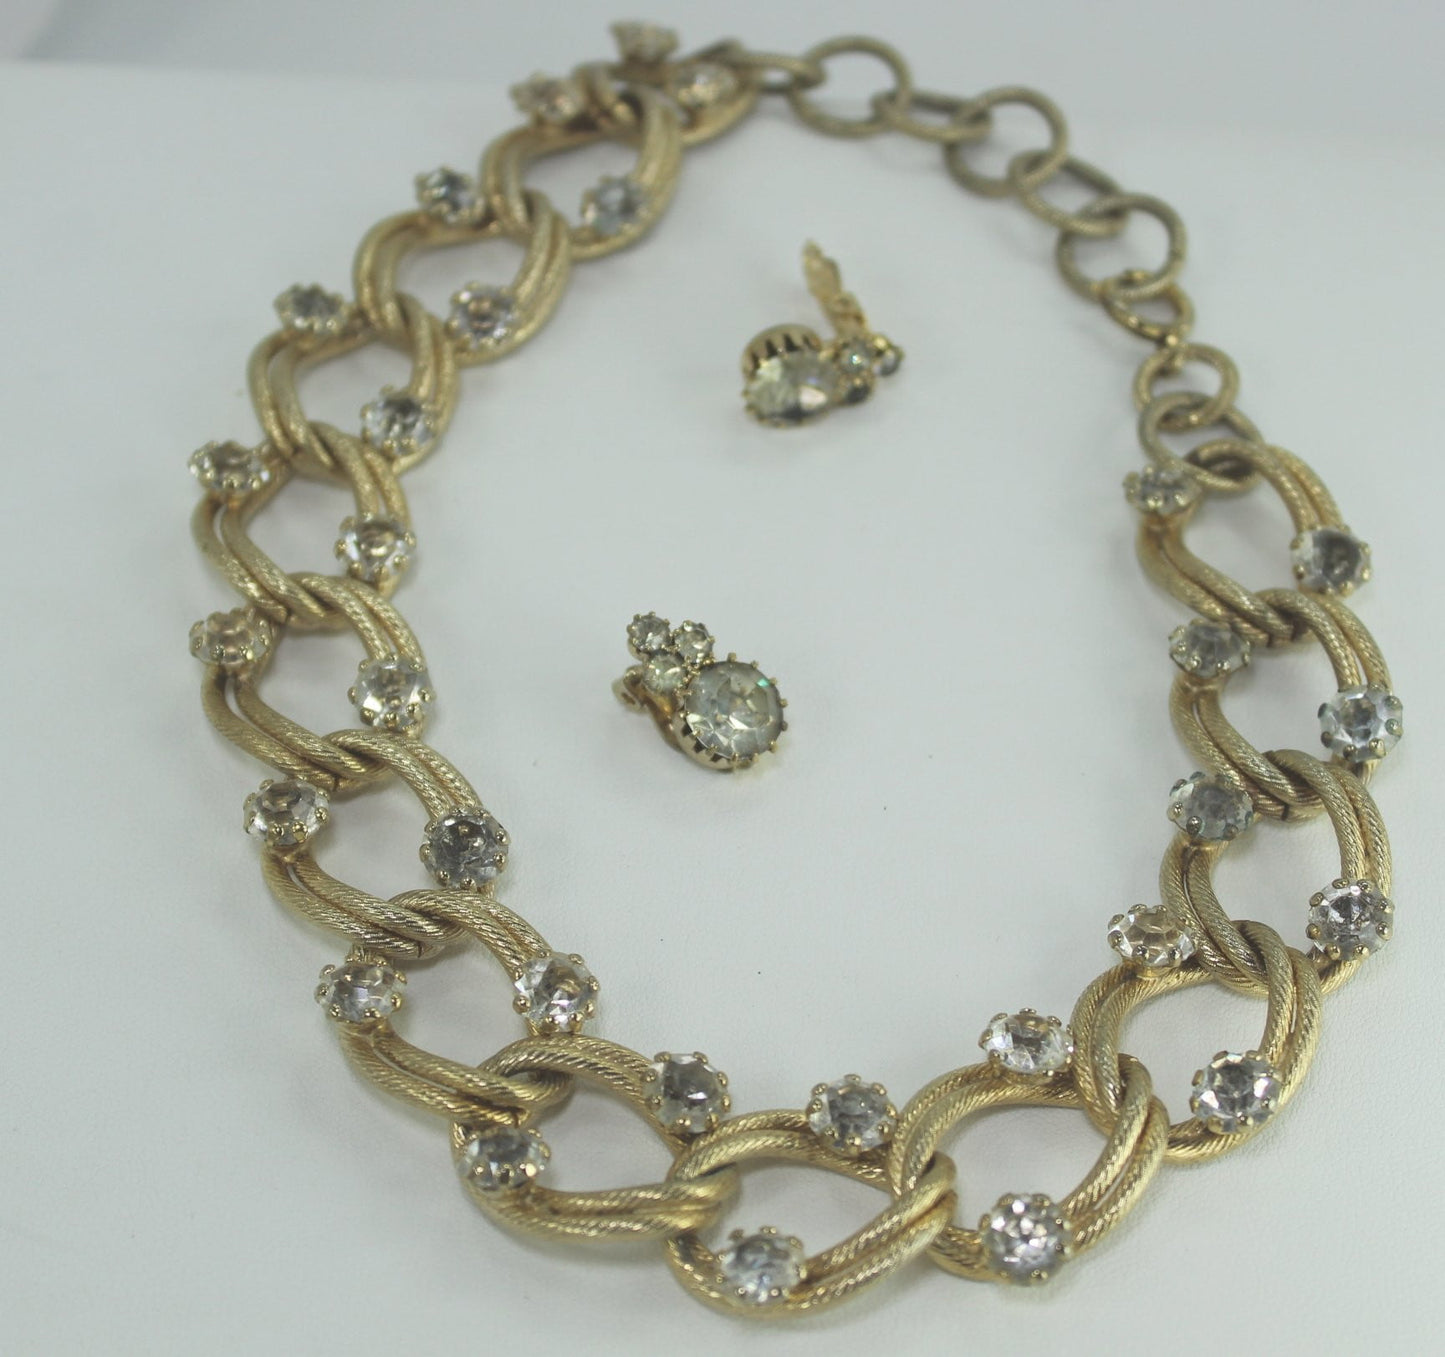 Jewelry Lot 8 Sets Necklace Earrings Vintage Germany Gold Crackle Filigree Pearl CZ MOP variety